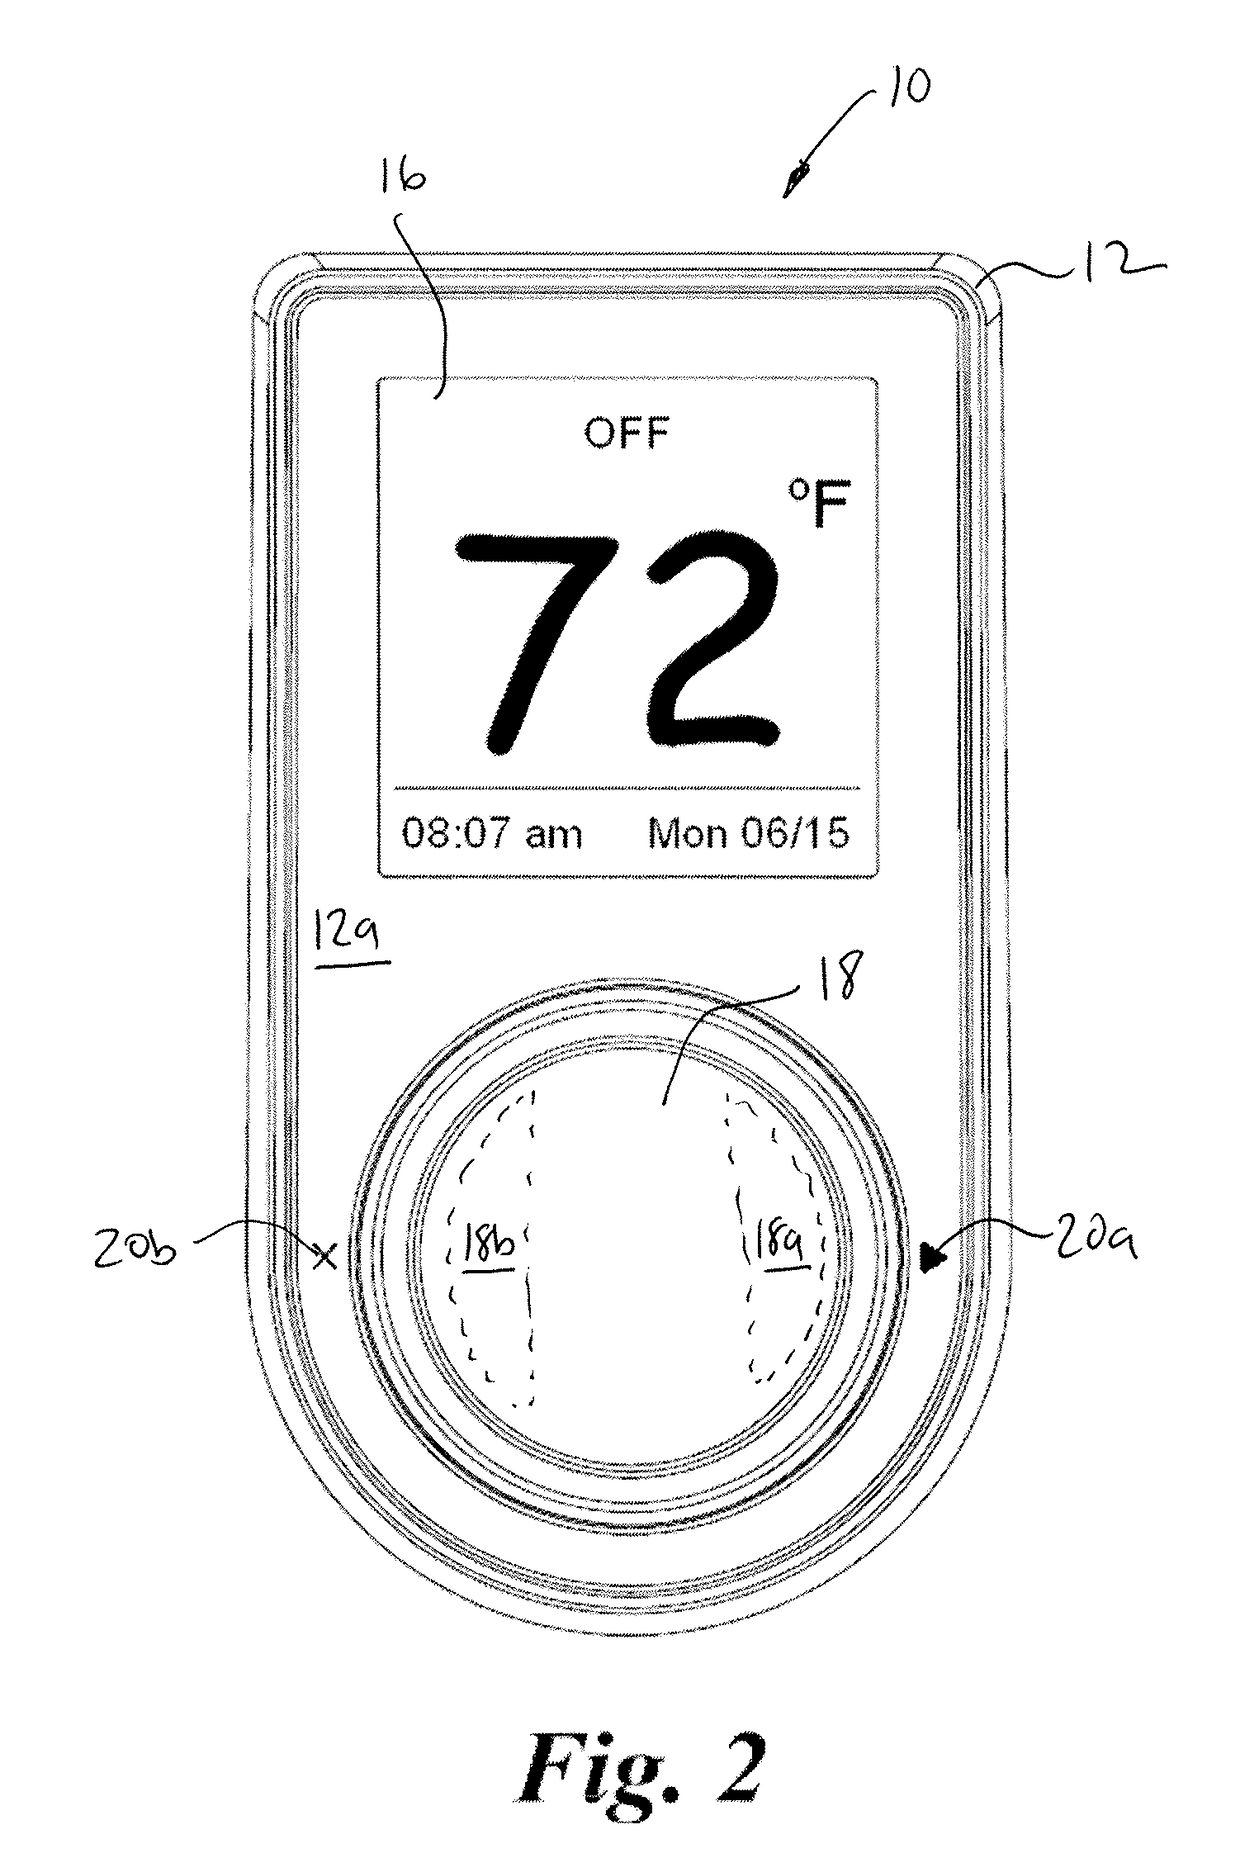 Thermostat with display screen and control dial having vertical and horizontal mounting configurations